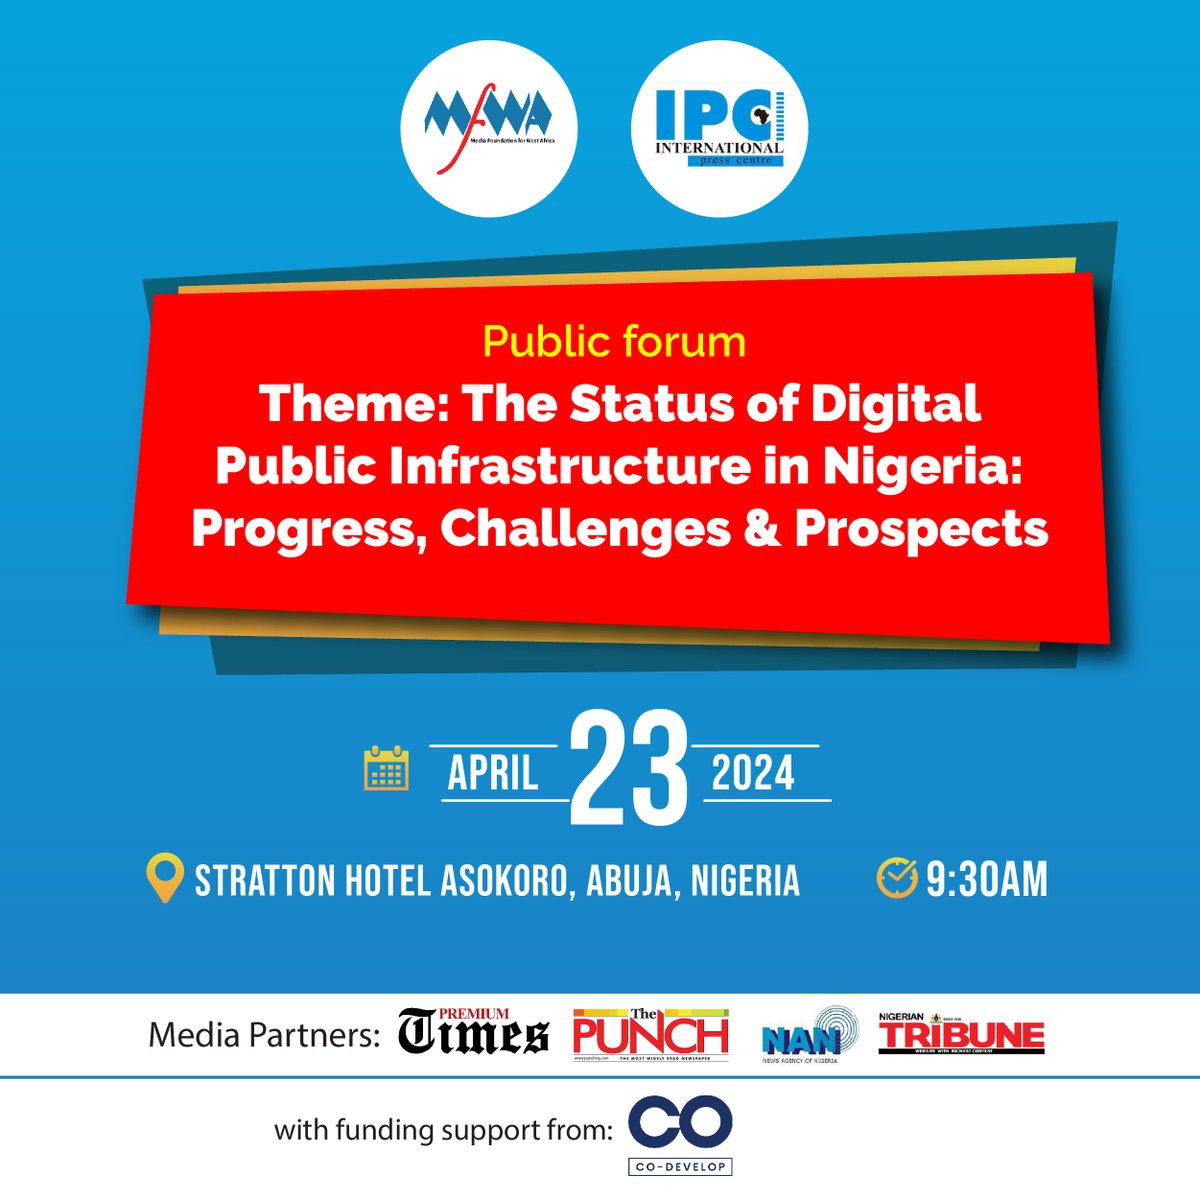 Our Public Forum on the status of digital infrastructure in #Nigeria commences in hours. Join us! @IPCng @PremiumTimesng @MobilePunch